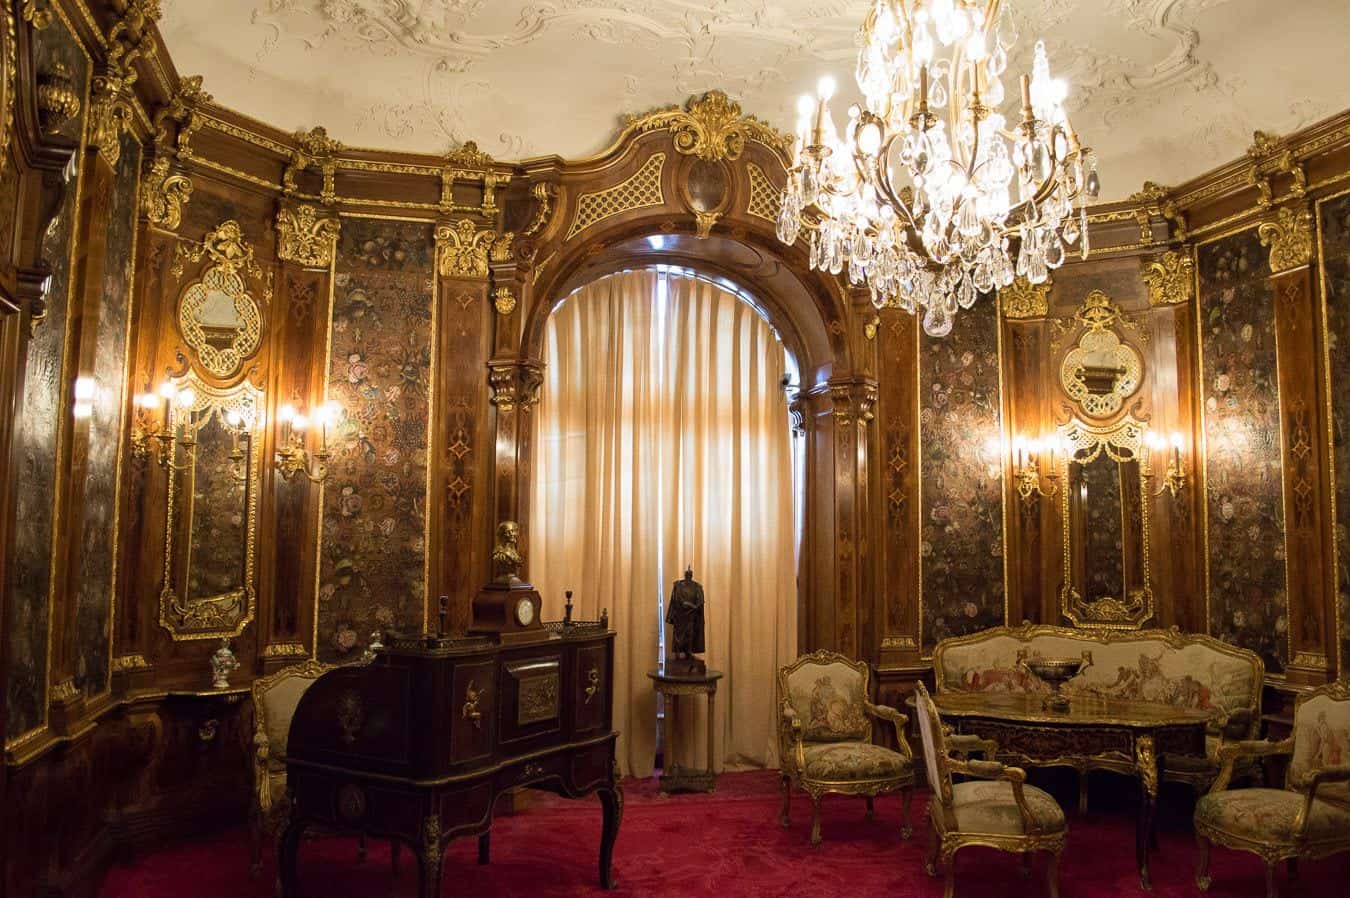 An elegant room with historic furniture and a dazzling chandelier hanging from the ceiling.